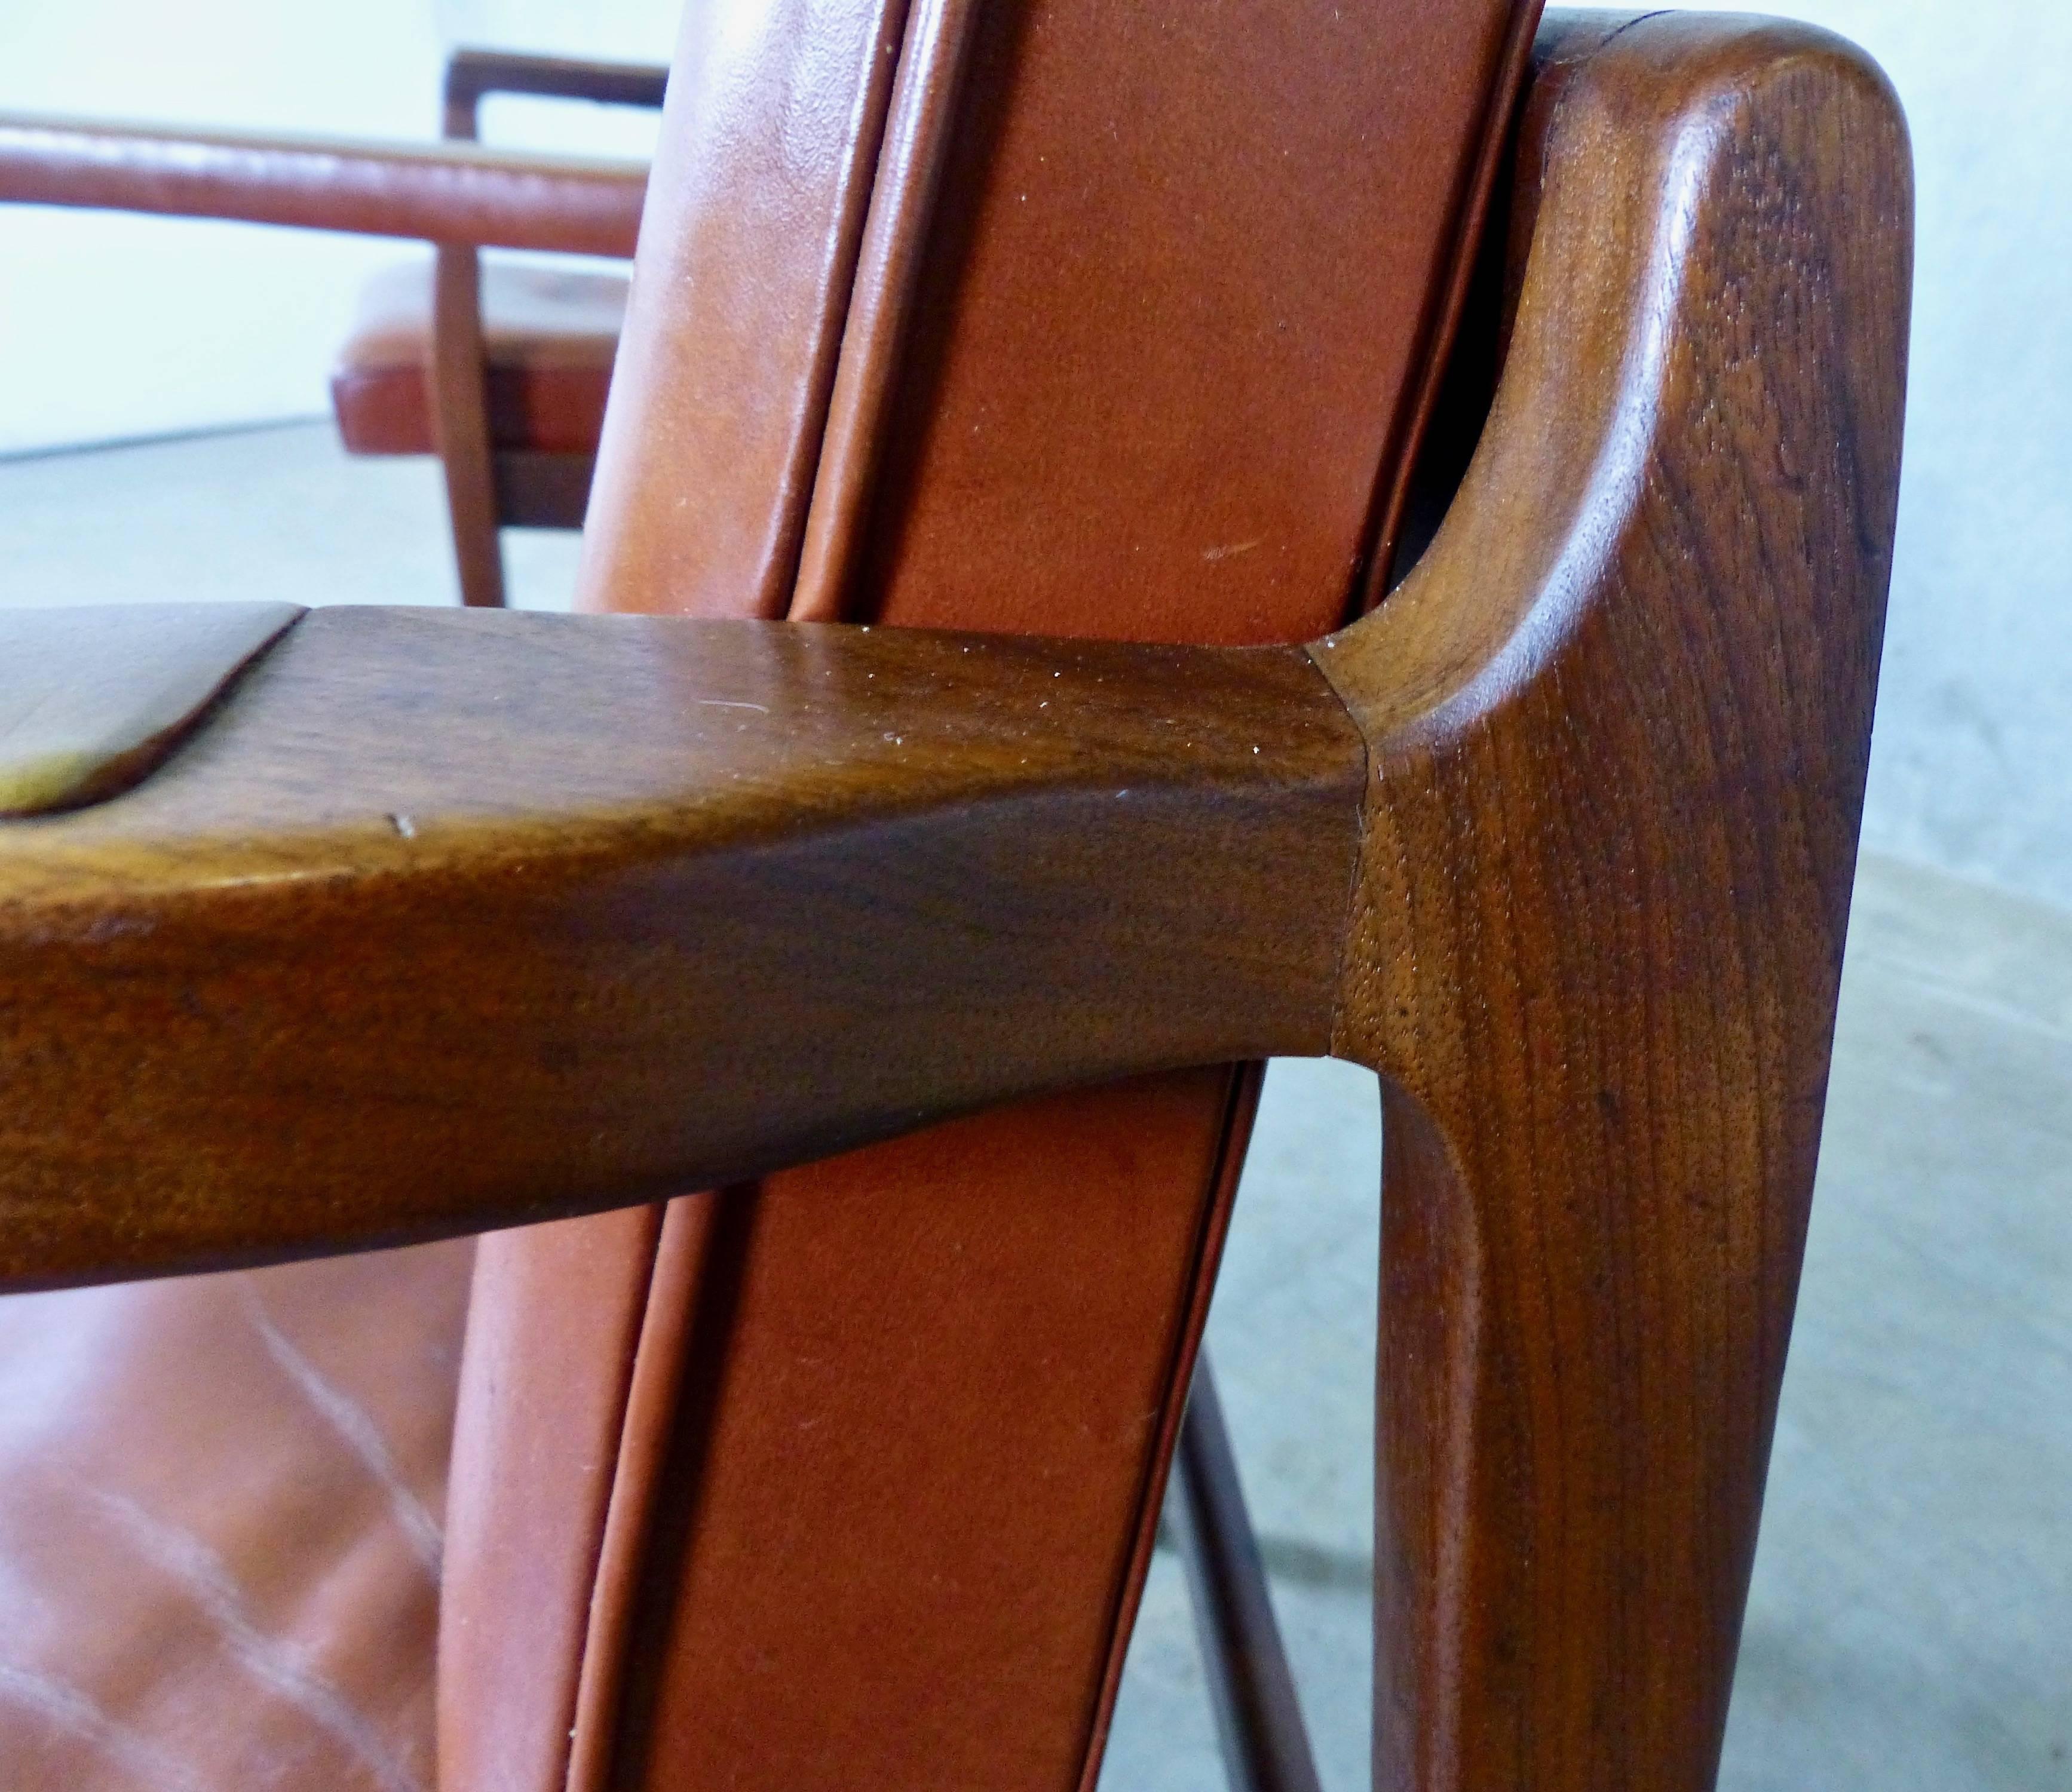 Matched pair of MCM armchairs in an amazing, on-trend rust color. 
Produced in the 1950s by the B.L. Marble Chair Company, which was founded in 1894 in Bedford, Iowa. 
Great style and cool leather armrest details in a solid wood-framed chair.